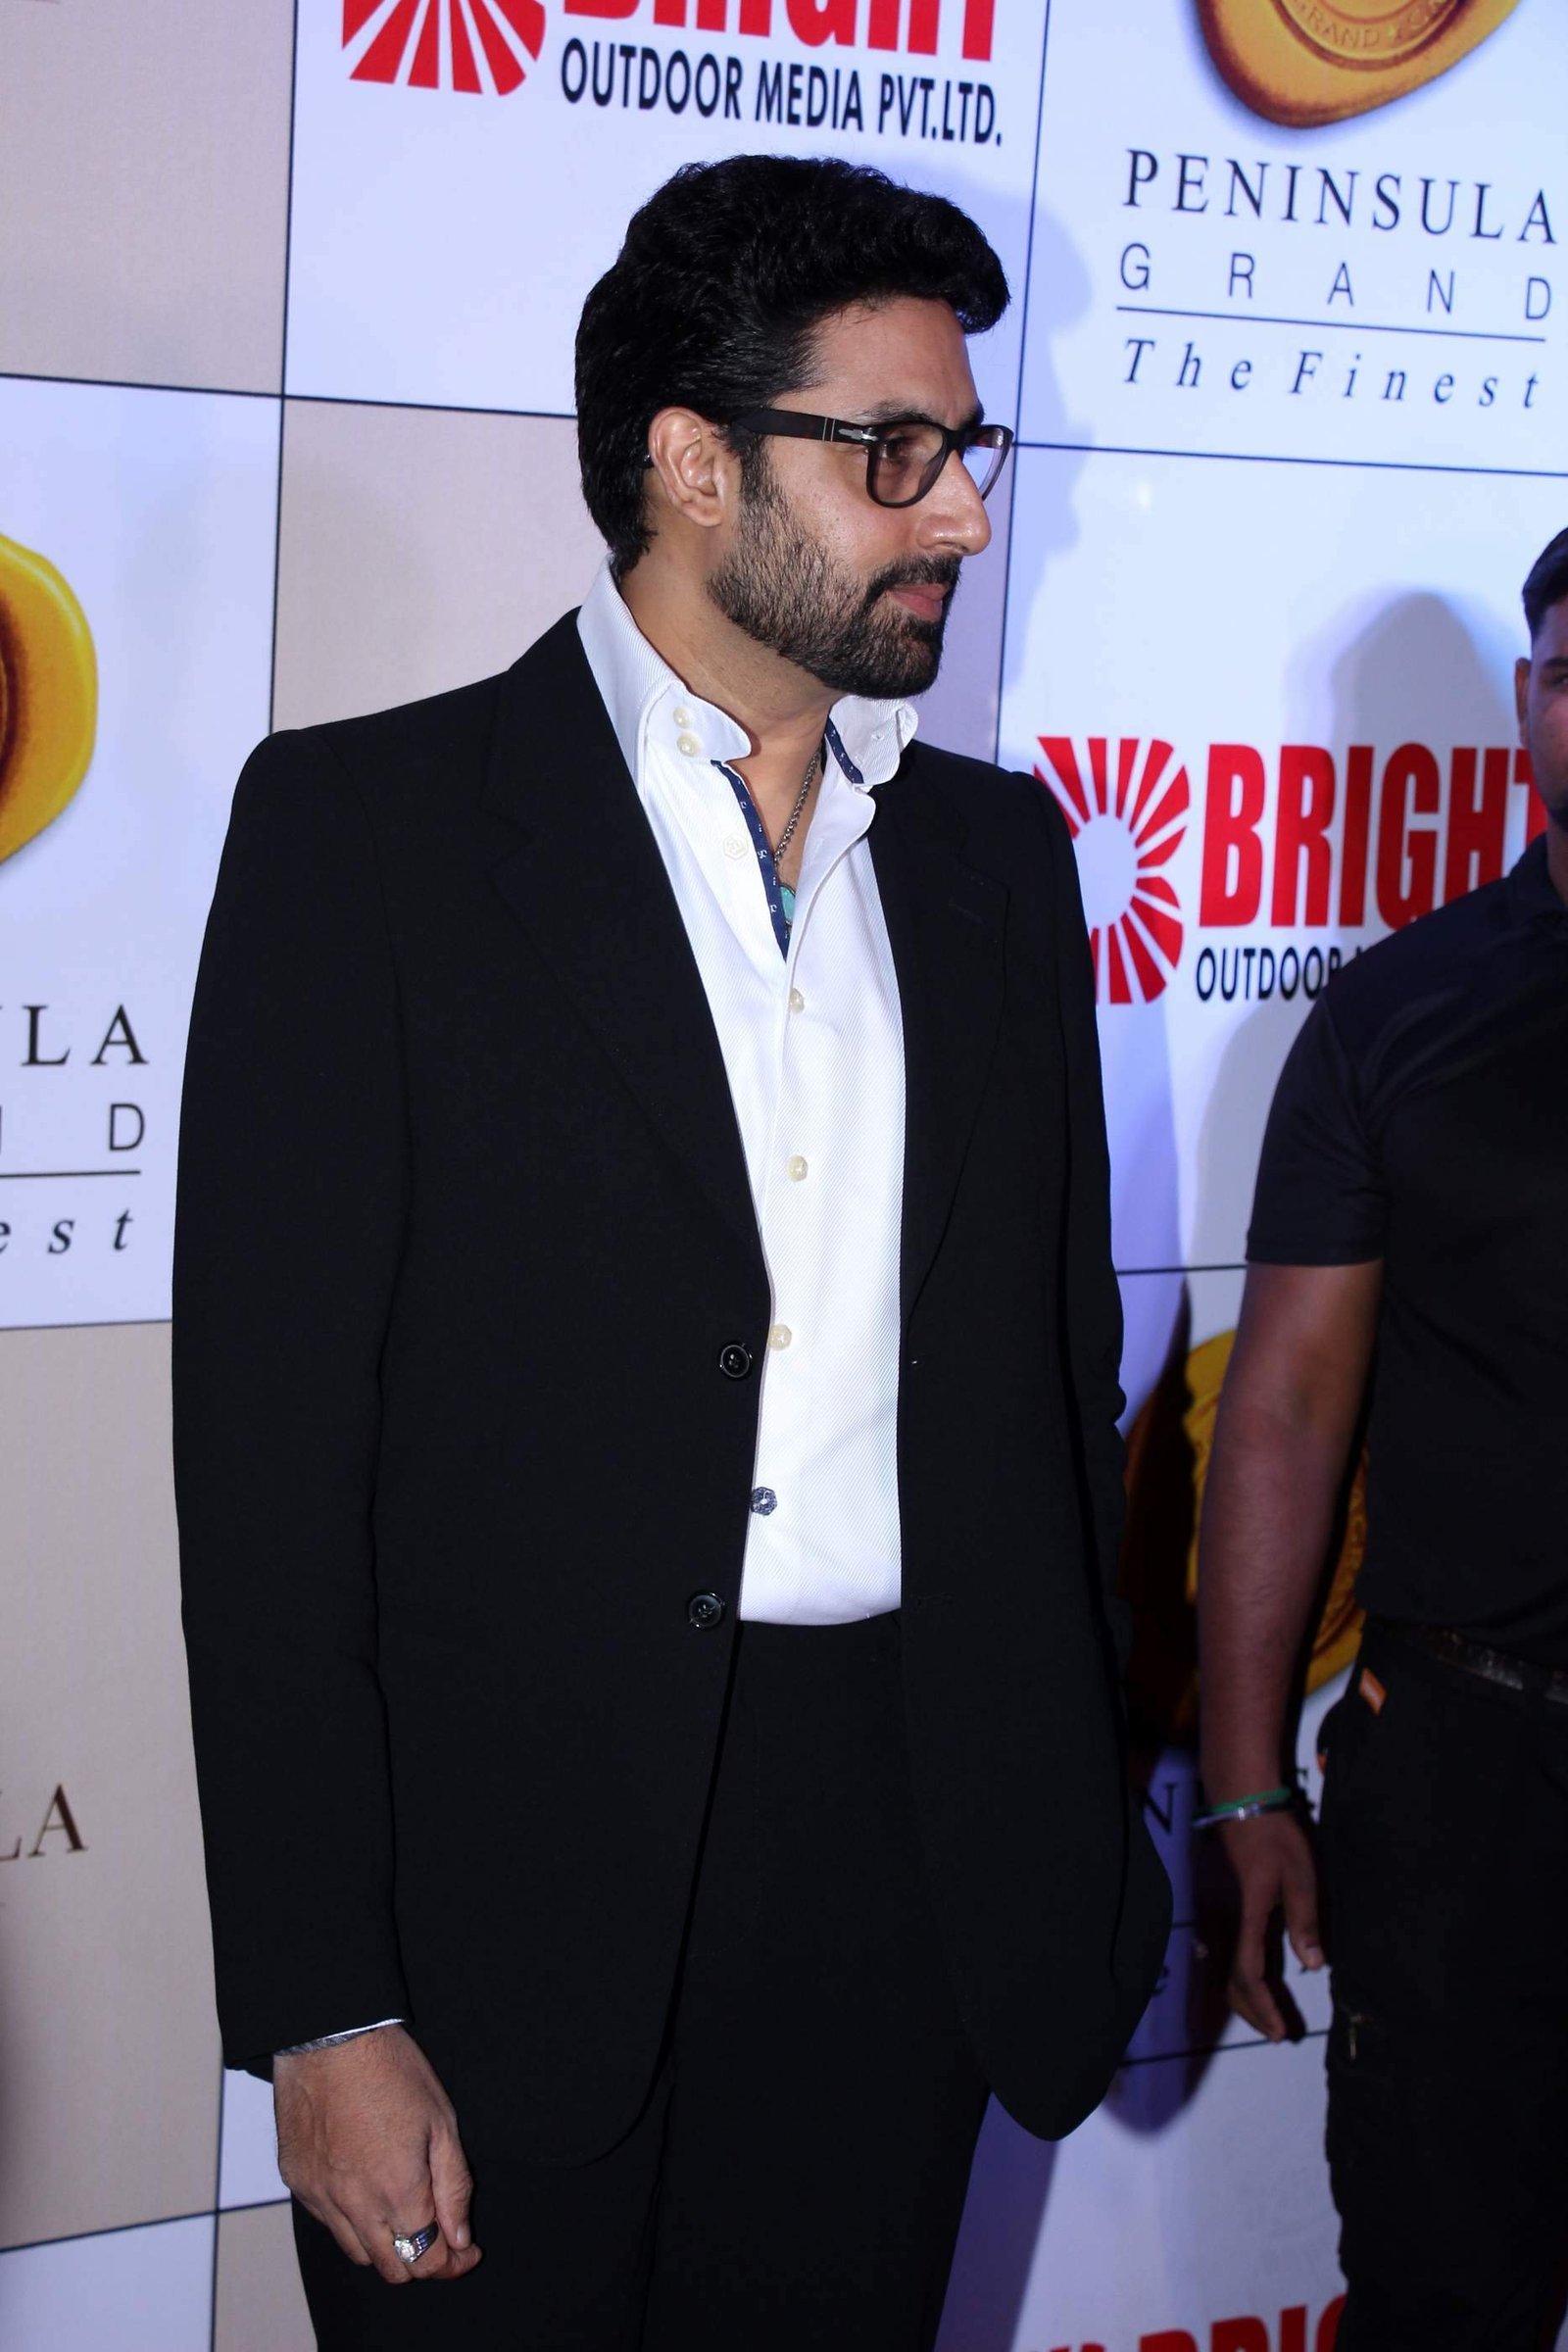 Abhishek Bachchan - 3rd Bright Awards 2017 Images | Picture 1470474